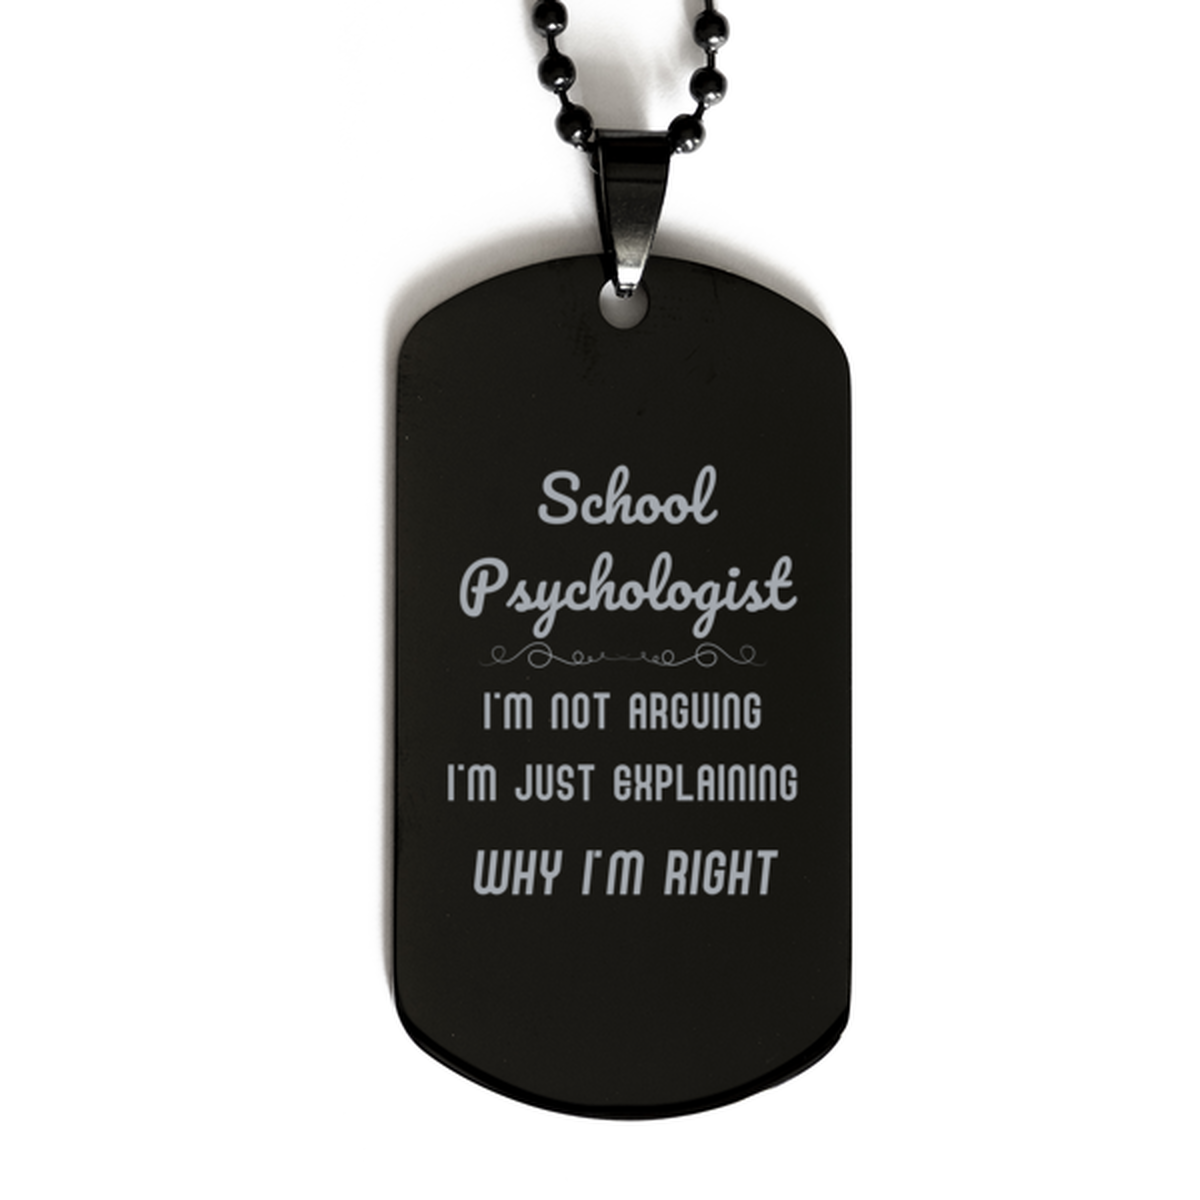 School Psychologist I'm not Arguing. I'm Just Explaining Why I'm RIGHT Black Dog Tag, Funny Saying Quote School Psychologist Gifts For School Psychologist Graduation Birthday Christmas Gifts for Men Women Coworker